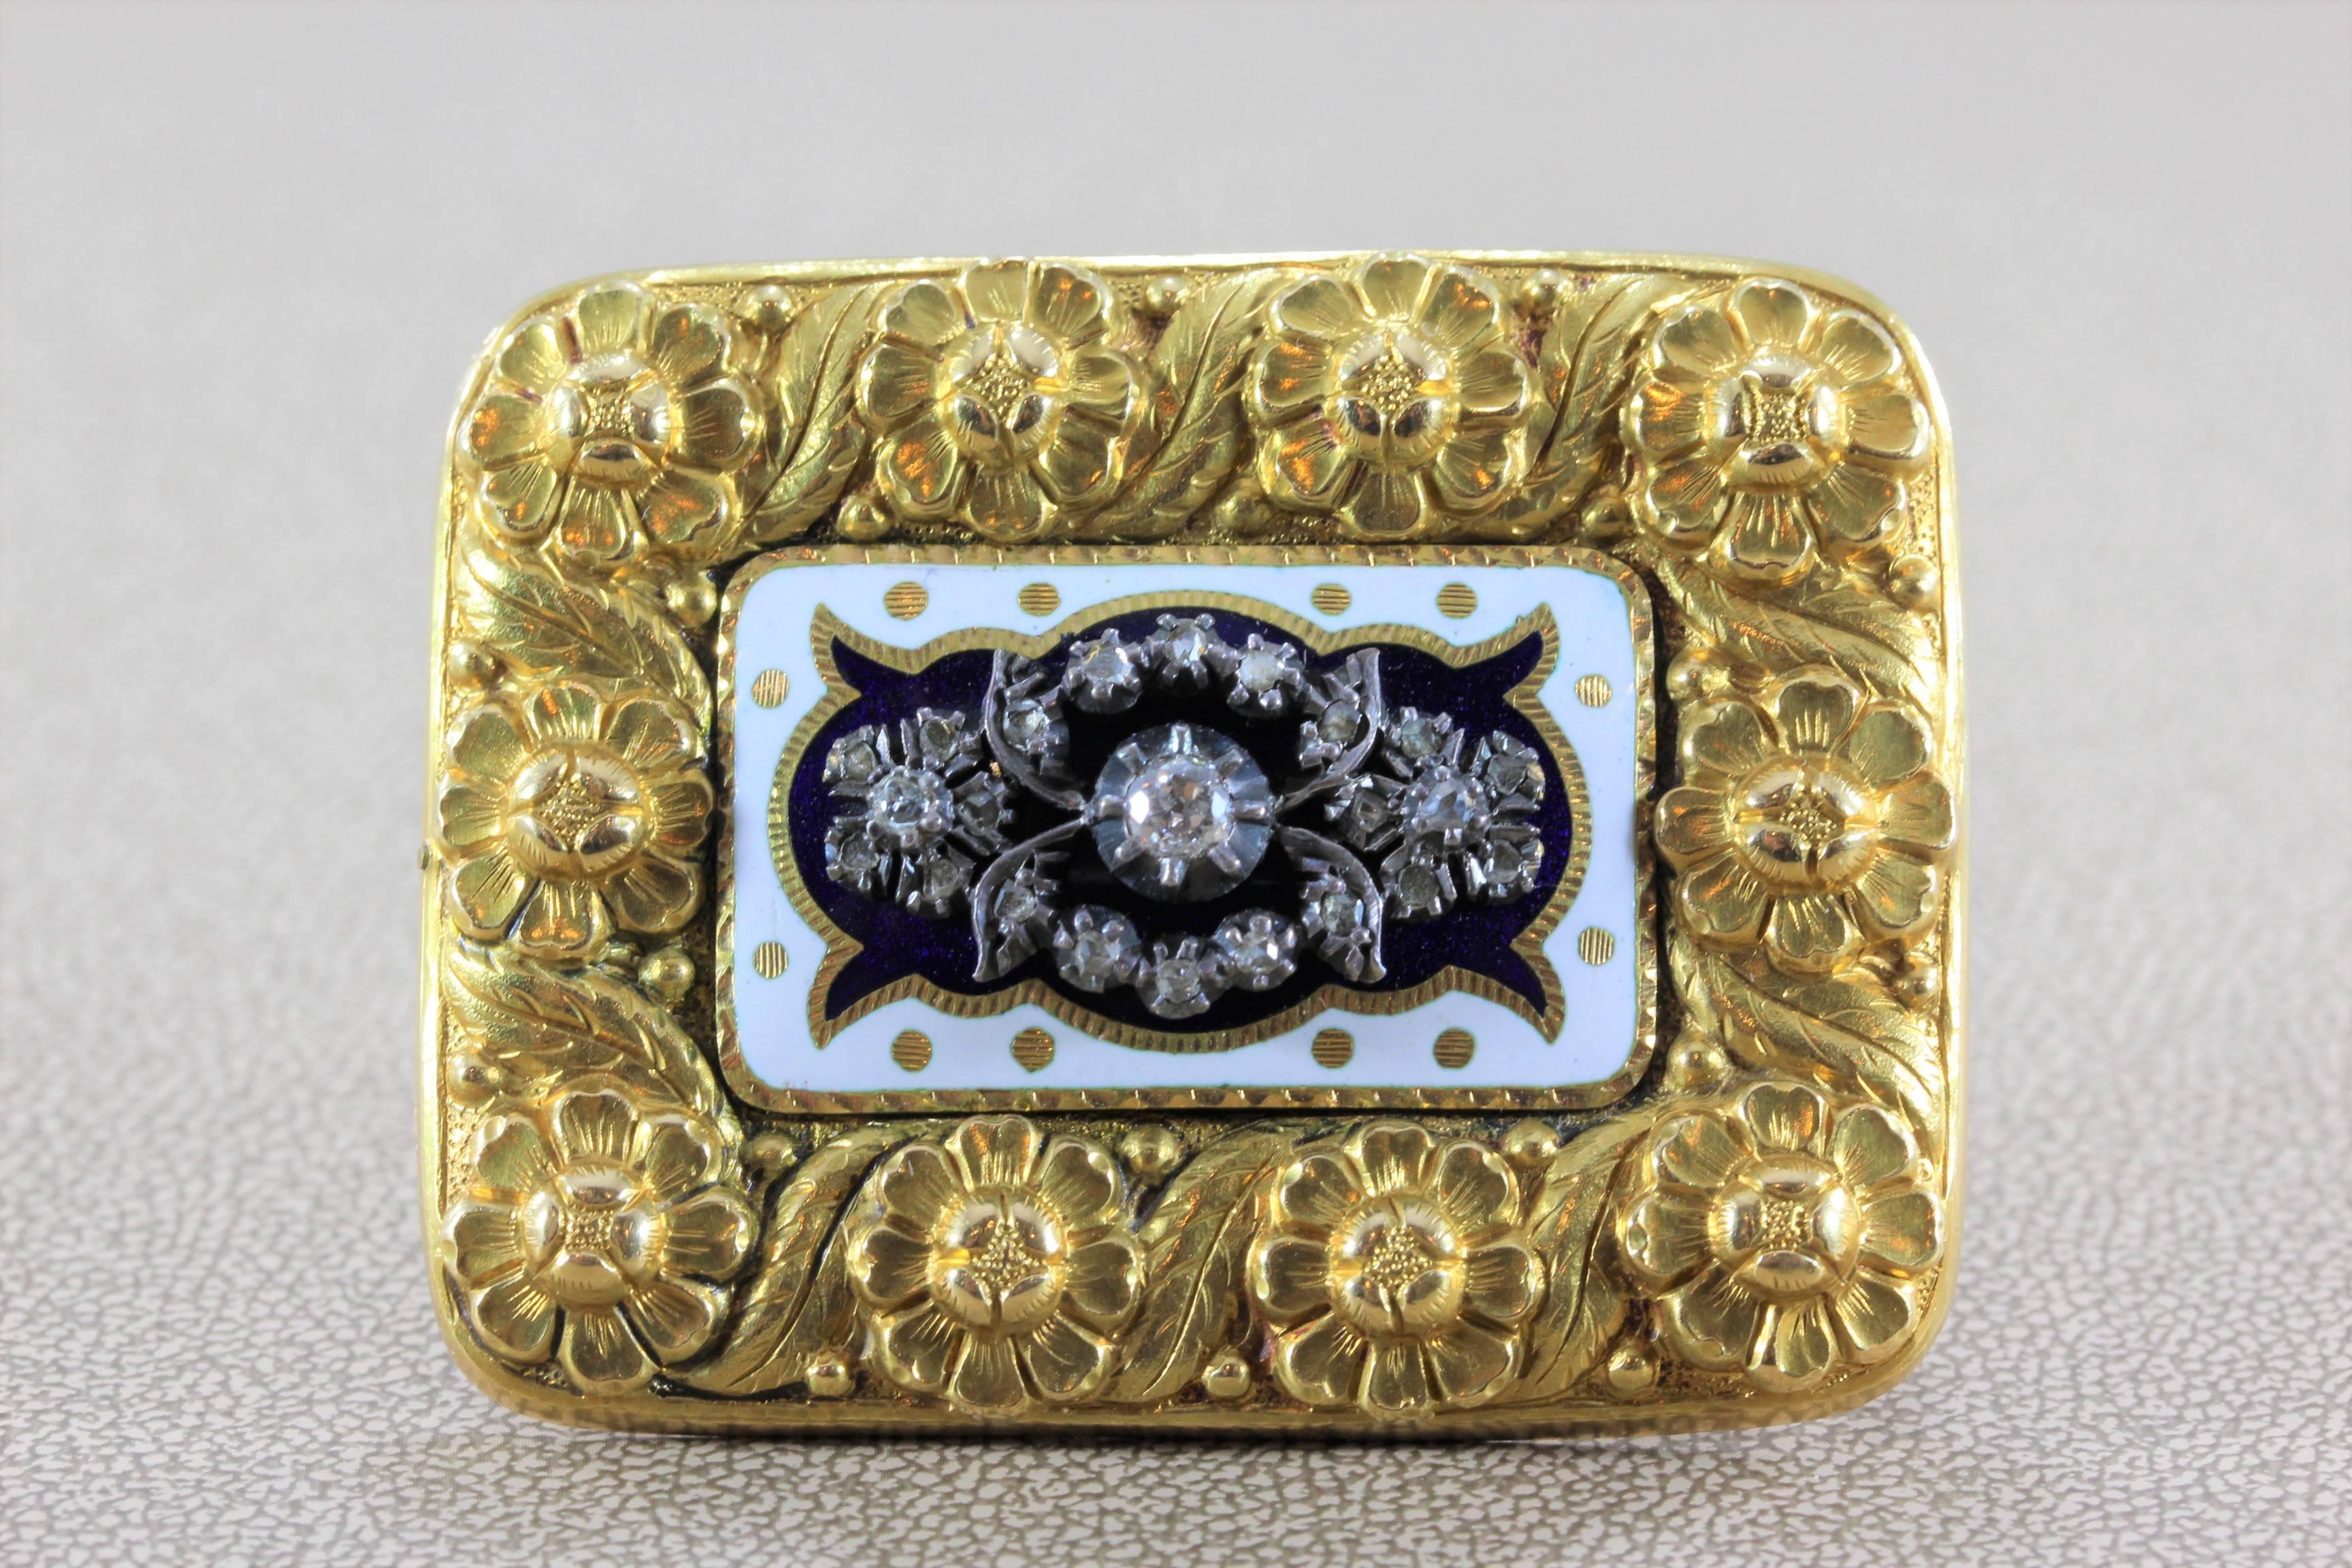 This beautiful 19th century floral brooch features European and rose-cut diamonds set in silver, enhanced by enamel applied on 18k gold. With delicate and detailed gold work, the craftsmanship is evident in this Victorian piece.  

Dimensions: 2.0 x